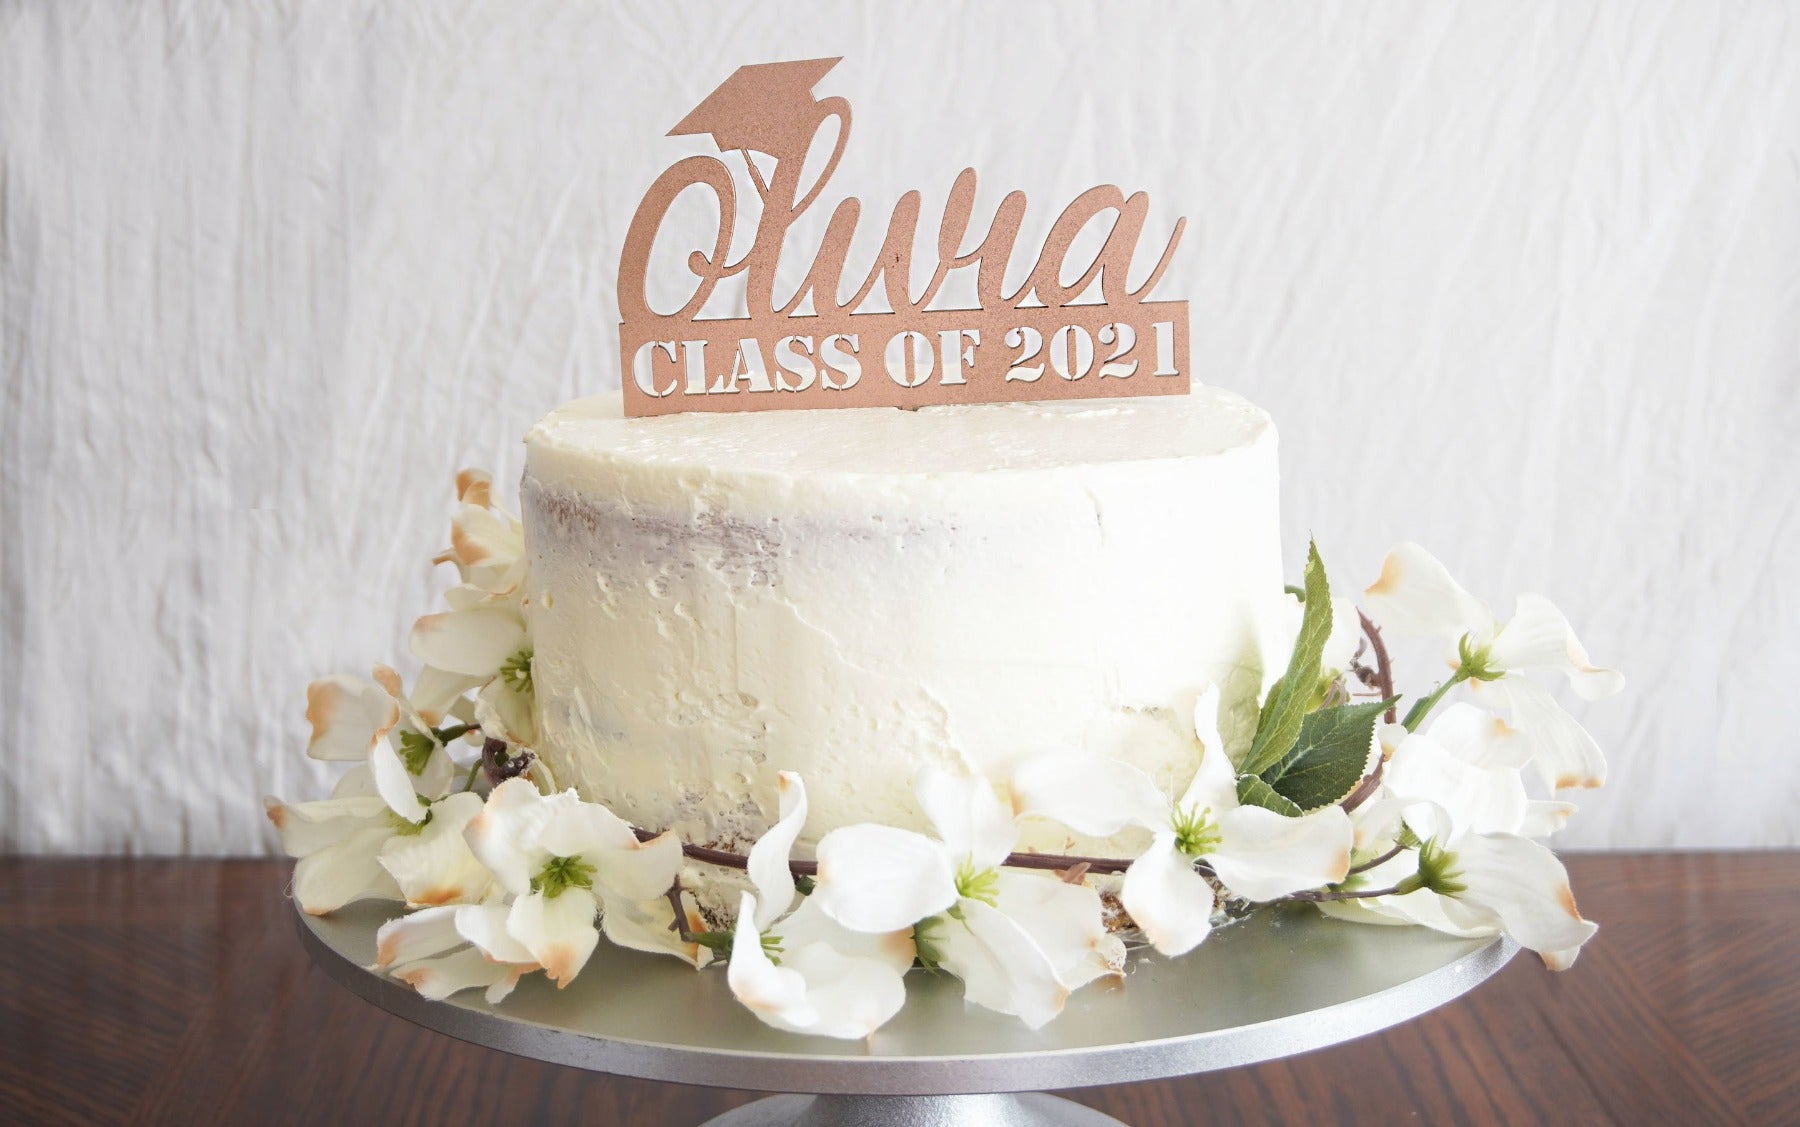 Personalized Graduation Cake Topper | Custom Congrats Class of 2021 Gift | Prom & Graduation Celebration Décor | Wood or Acrylic, Cake Toppers, designLEE Studio, designLEE Studio